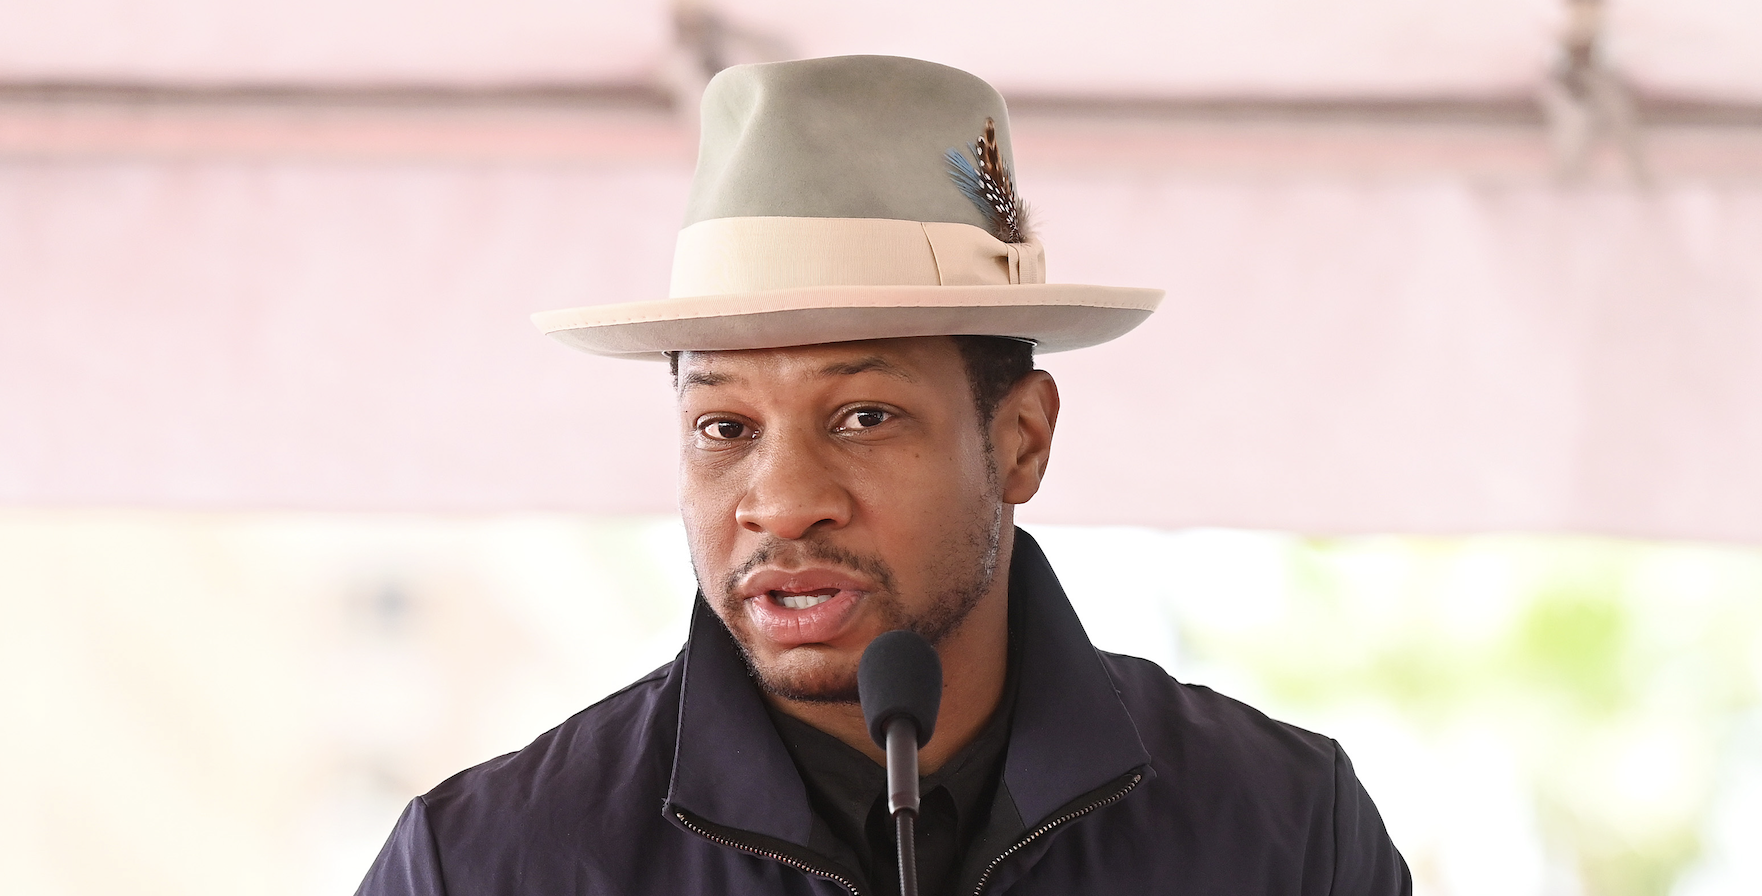 Jonathan Majors: New Texts Allegedly Show Victim Admitting Fault